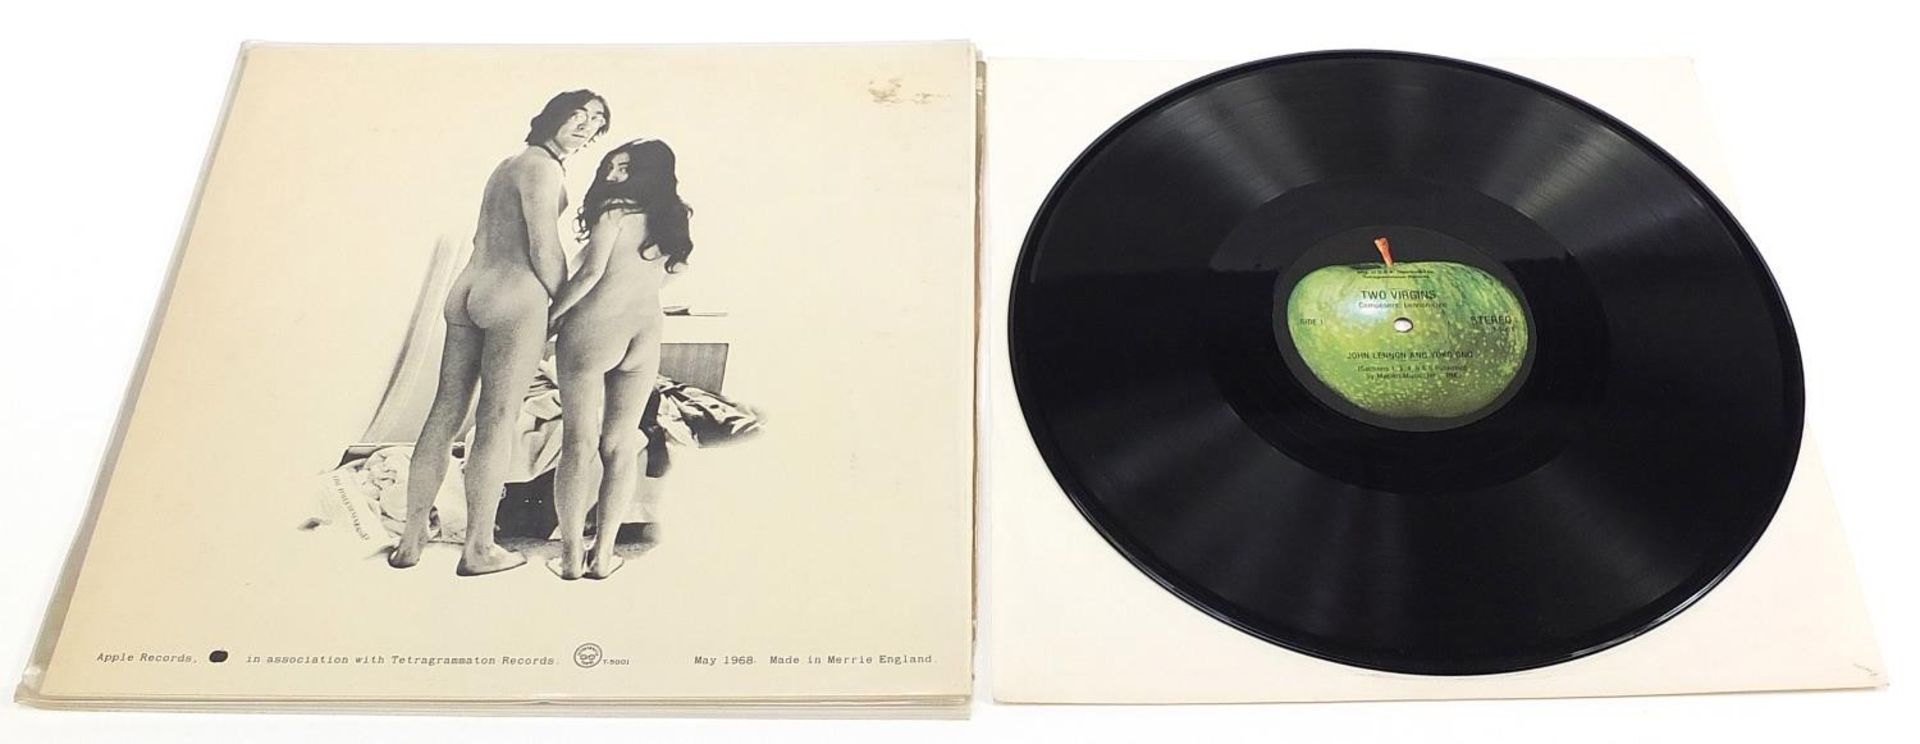 The Beatles, John Lennon & Yoko Ono vinyl LP records including Walls and Bridges with poster, - Image 8 of 41